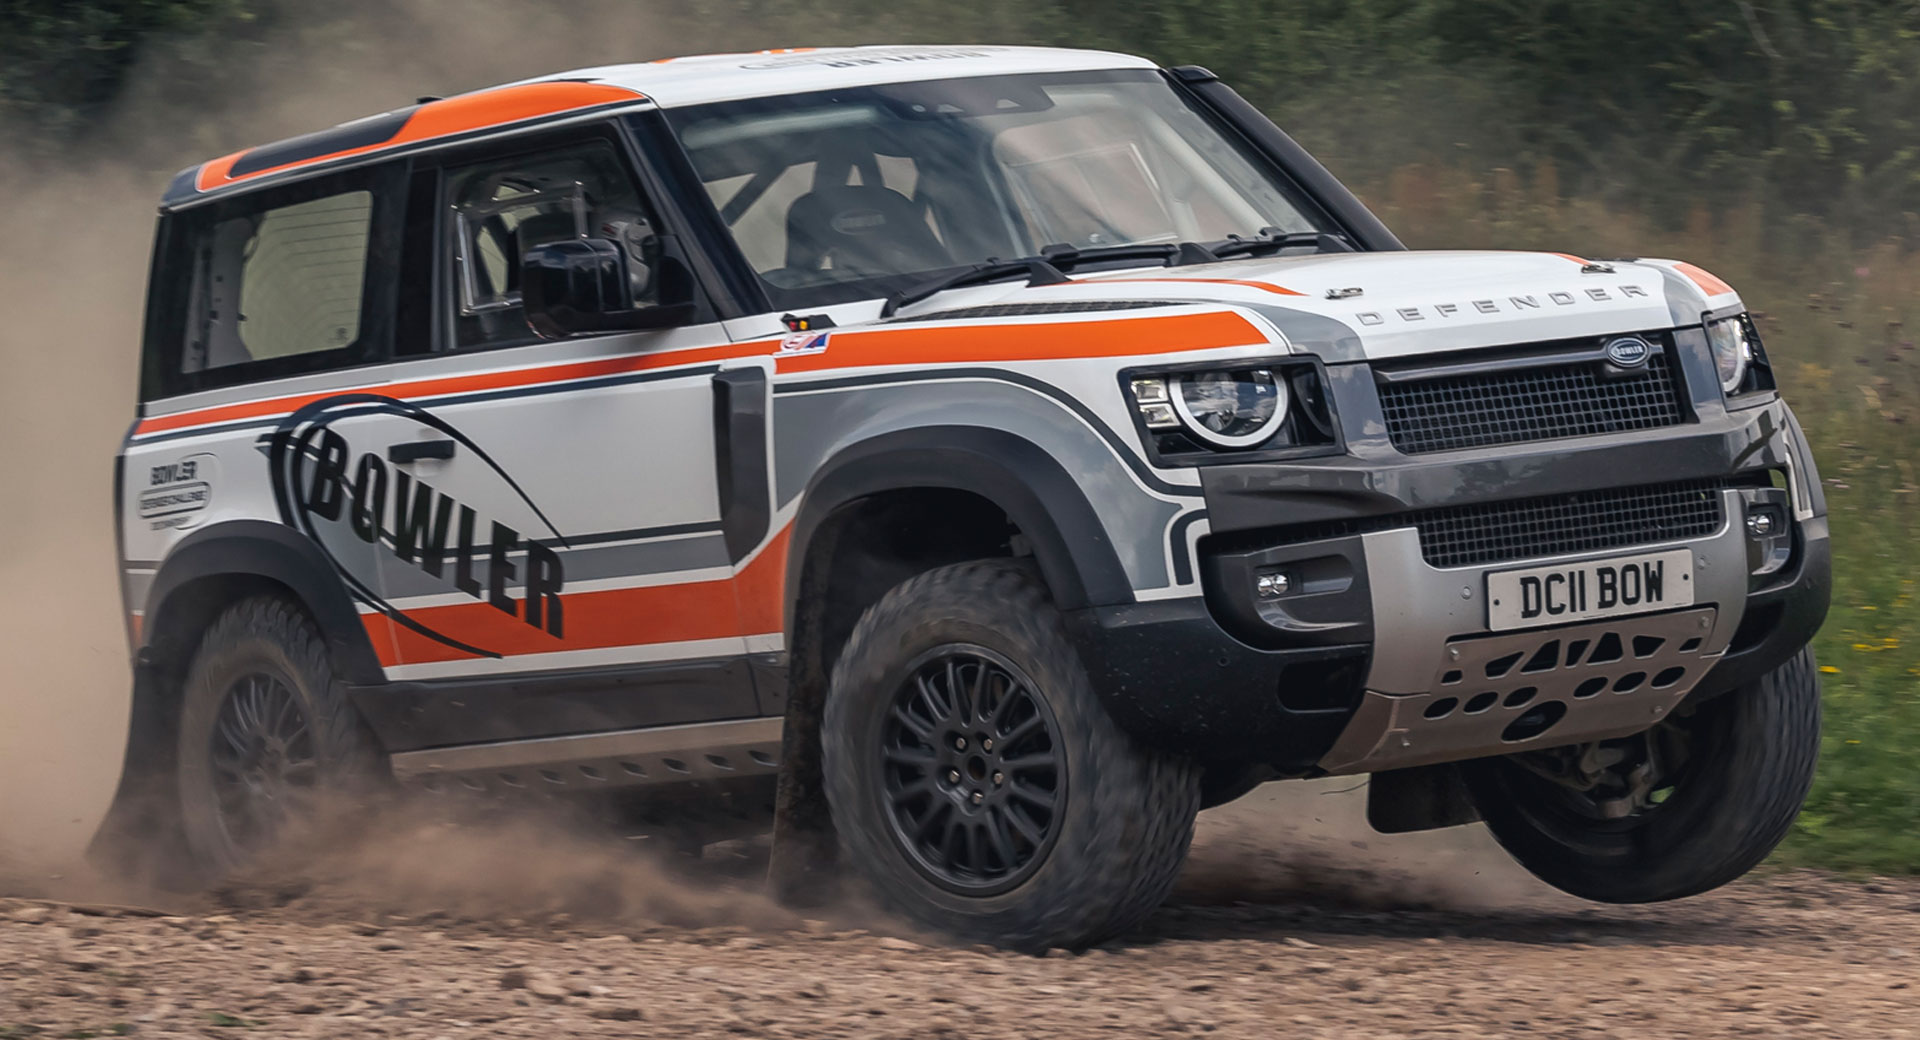 Bowler And Land Rover Unveil Defender Rally Car, Will Compete In One